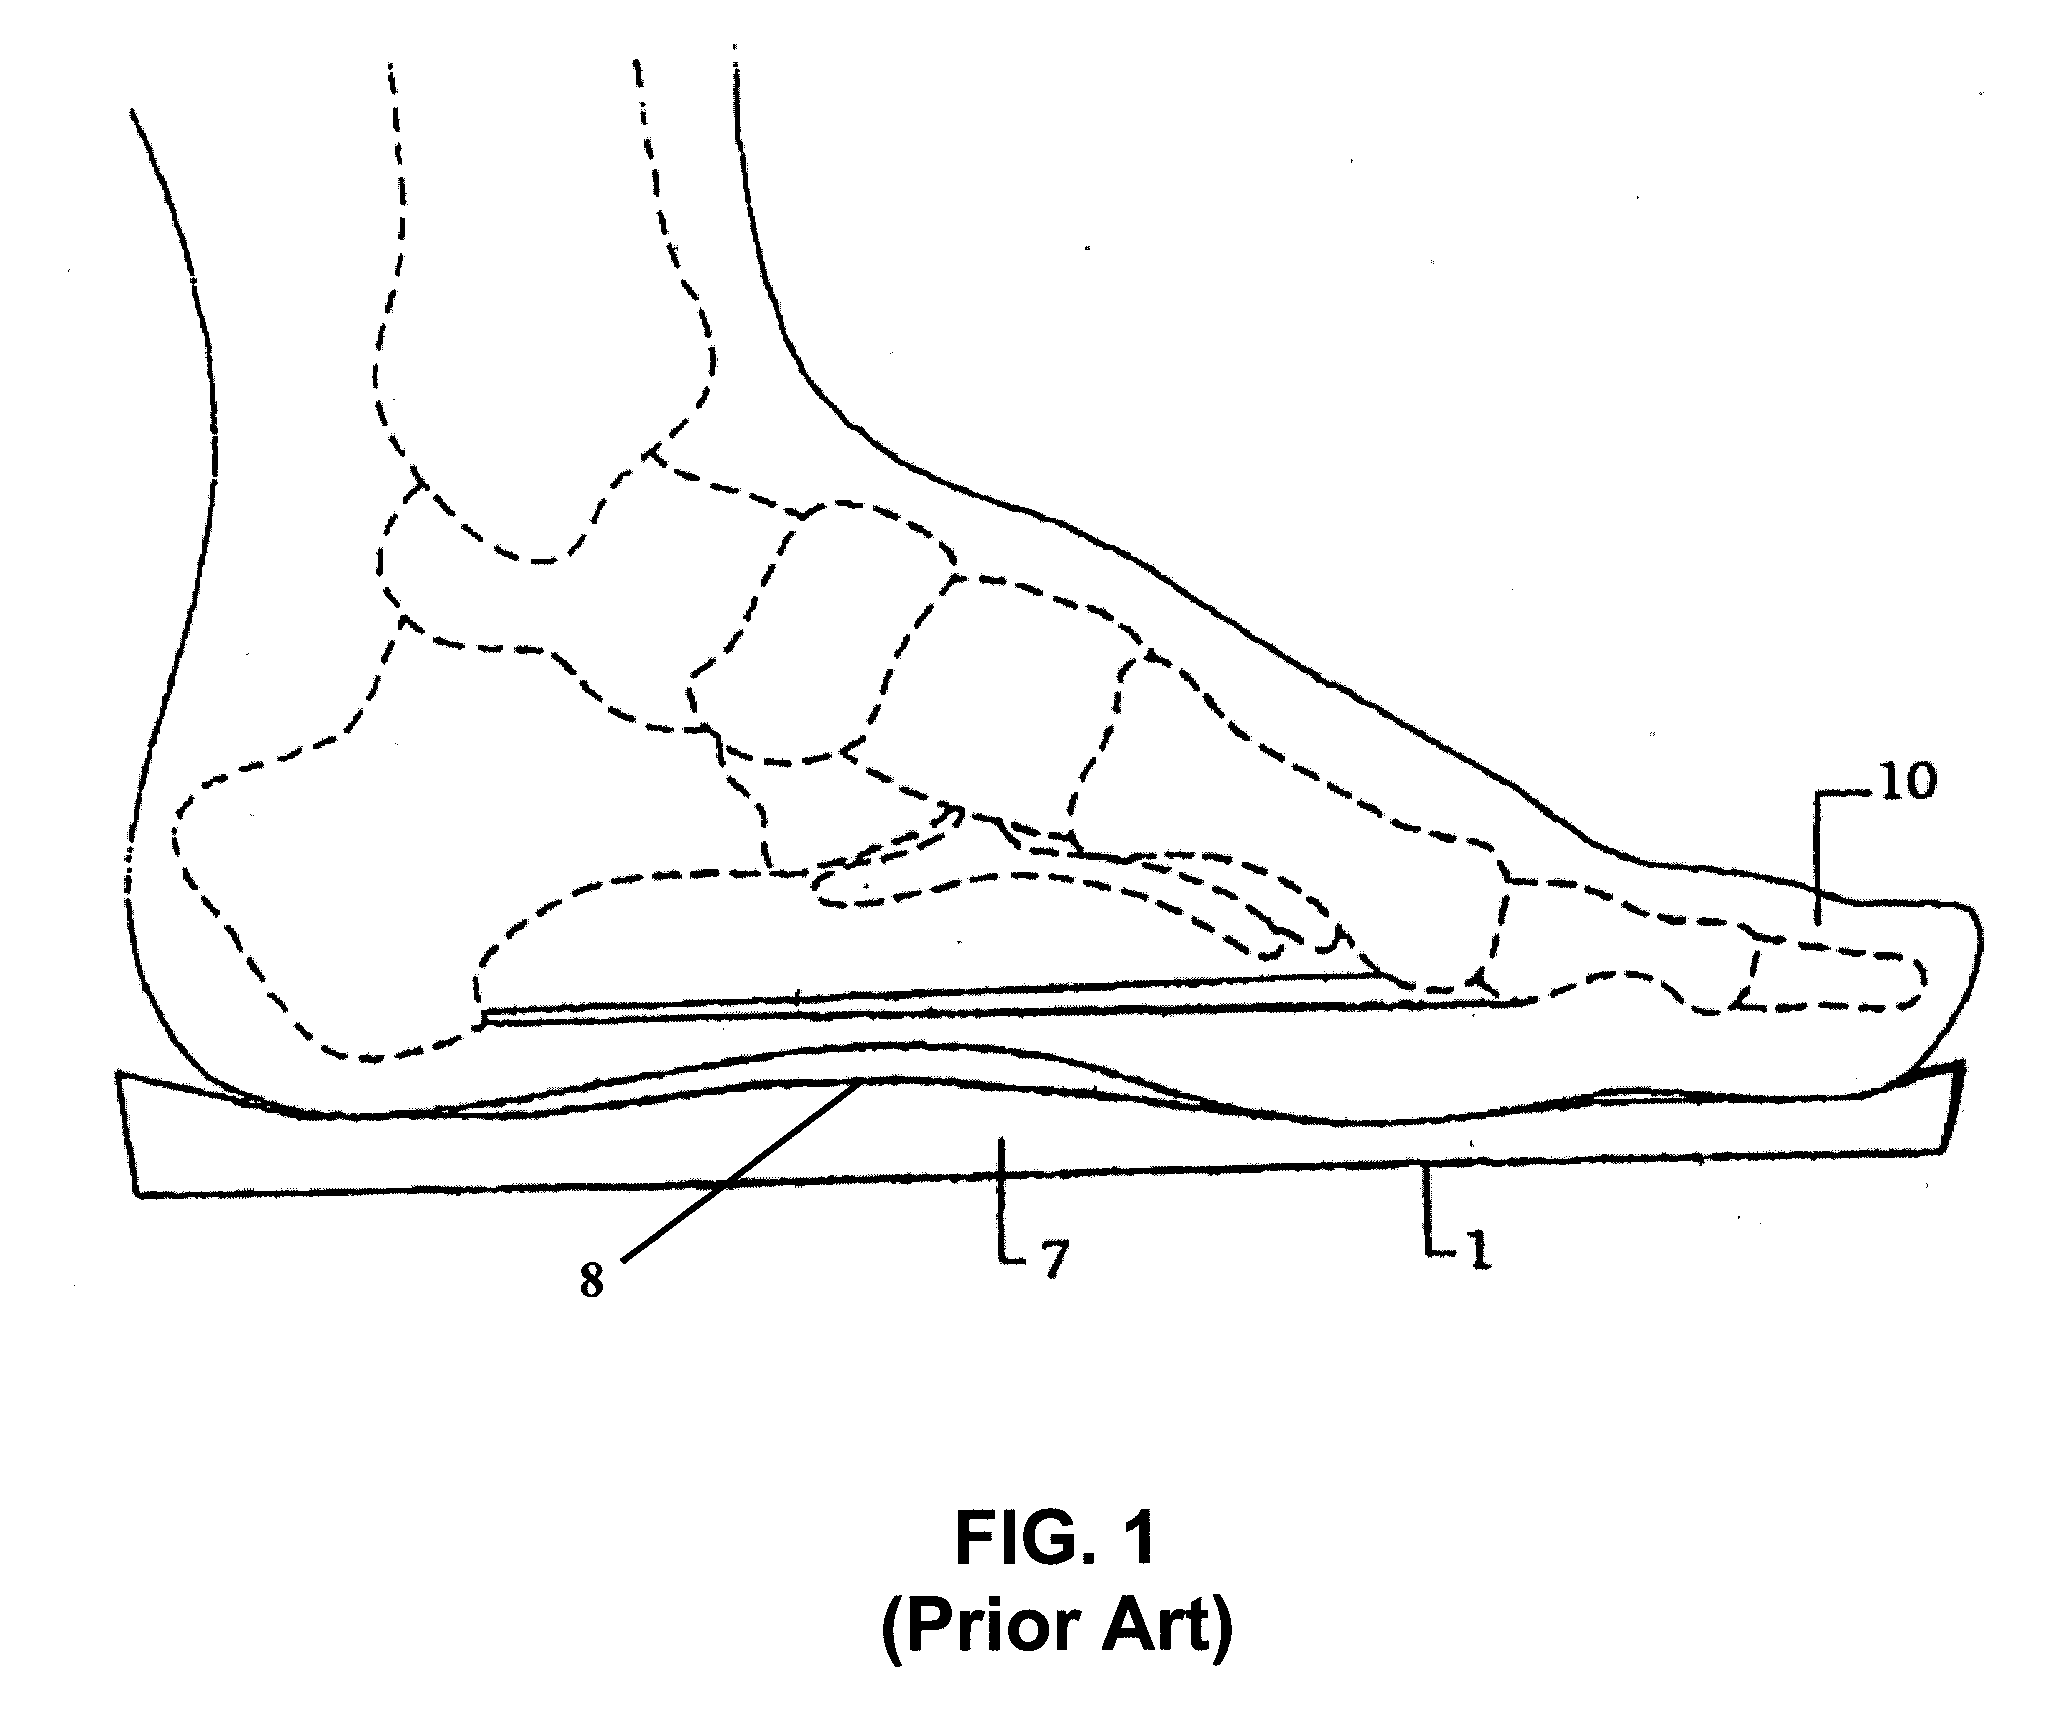 Shoe appliance with an orthopedic device